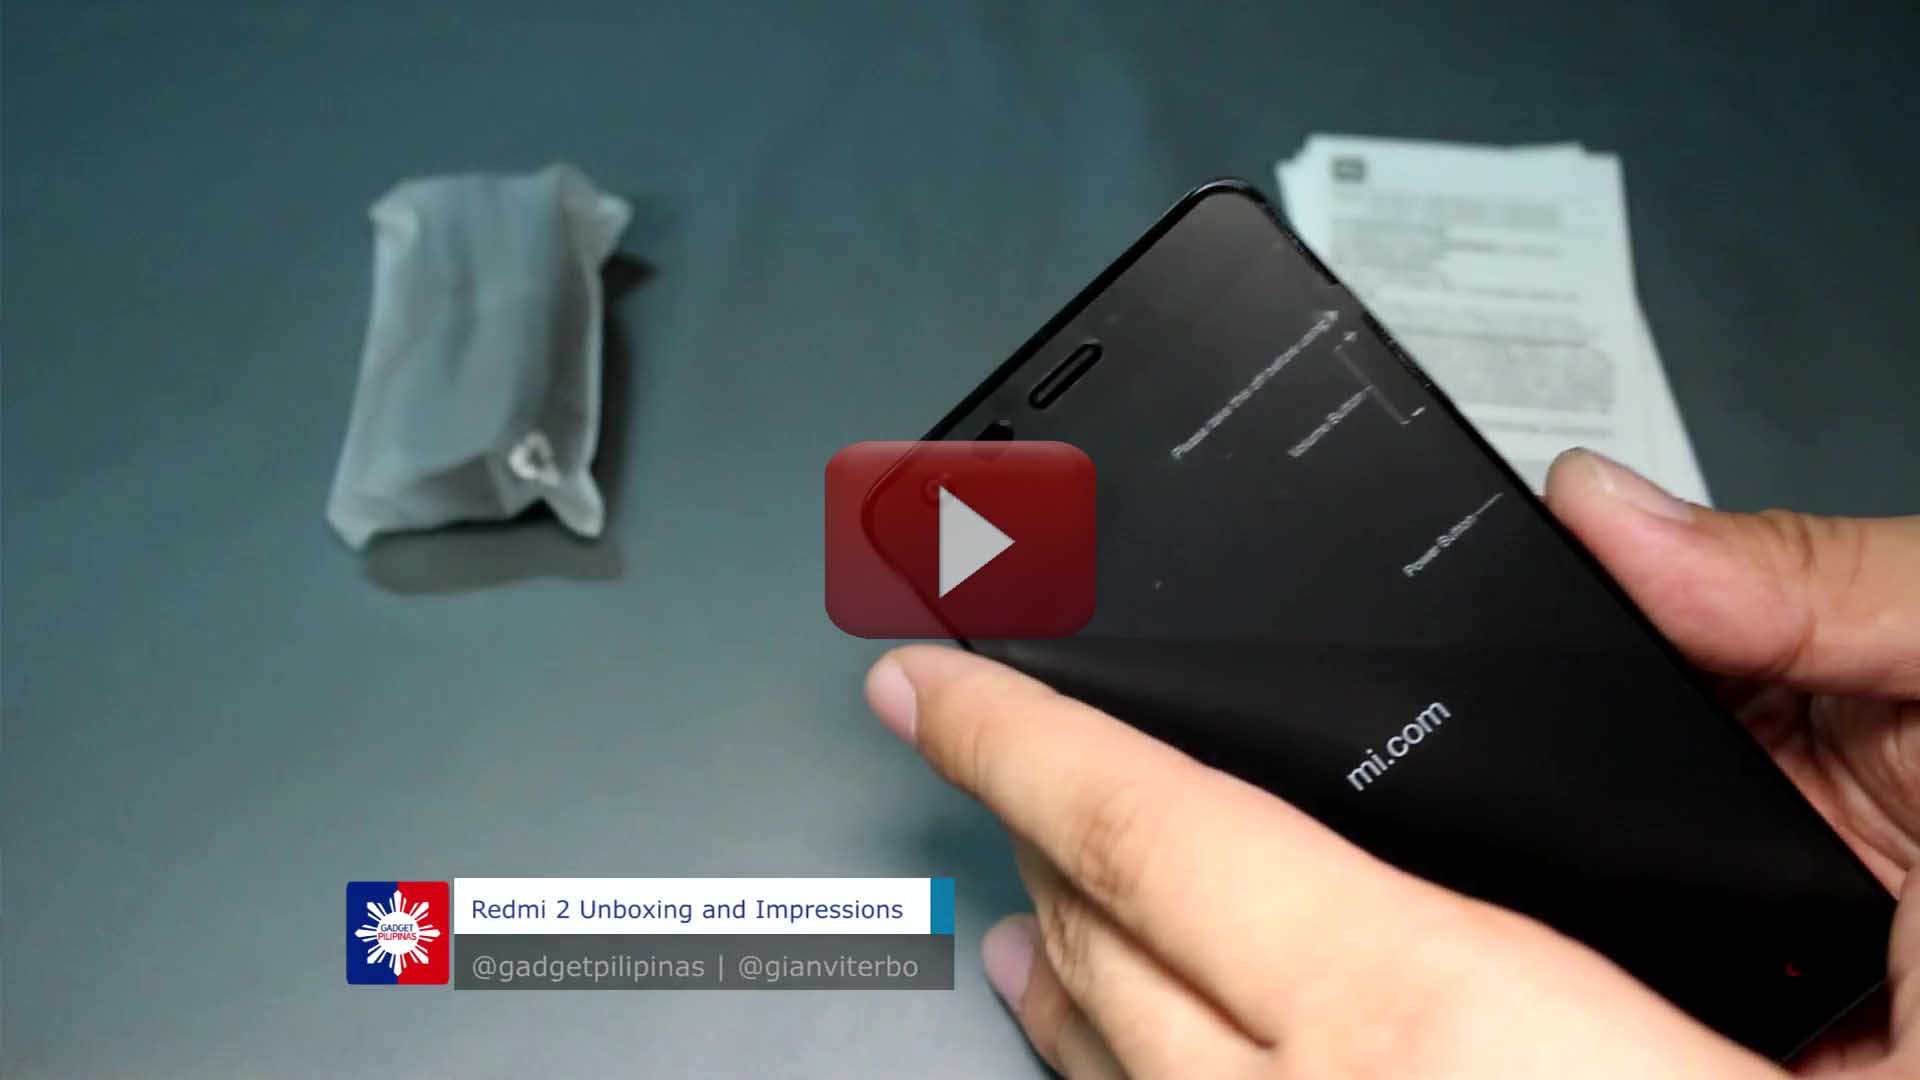 Redmi 2 Unboxing and Impressions [Video]